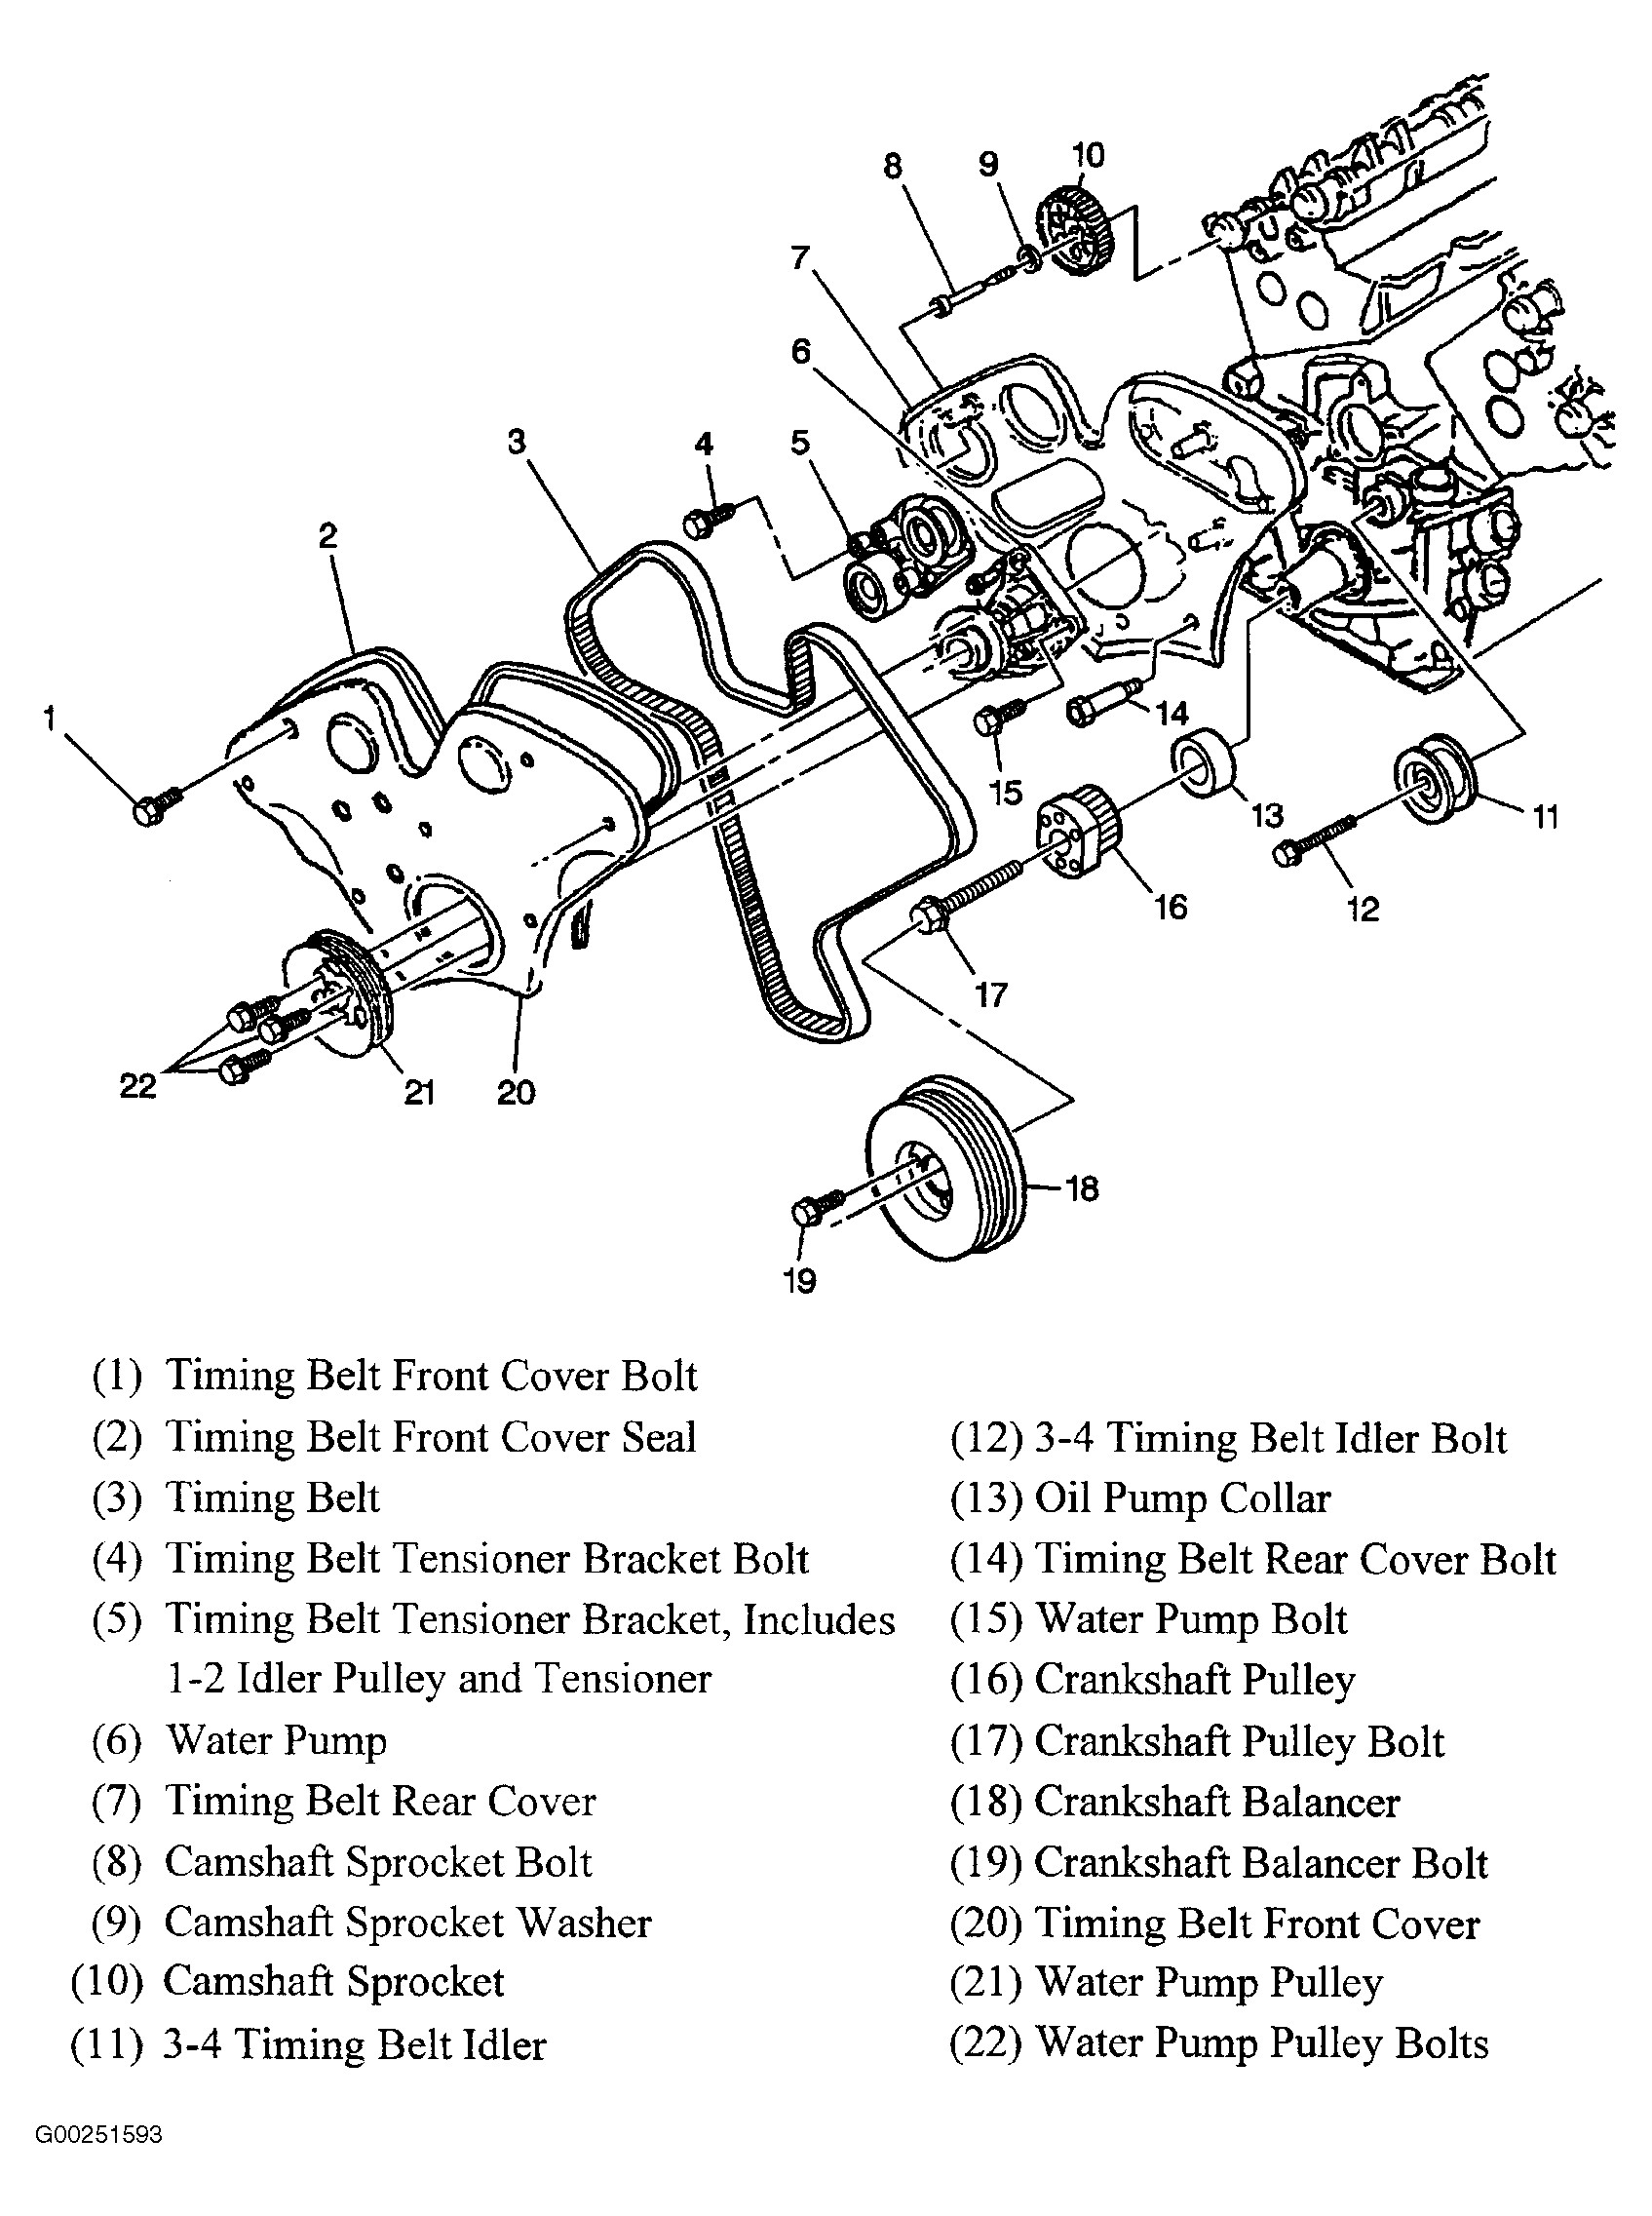 Part Diagram for Car 2003 Cadillac Cts Serpentine Belt Diagram Auto Of Part Diagram for Car